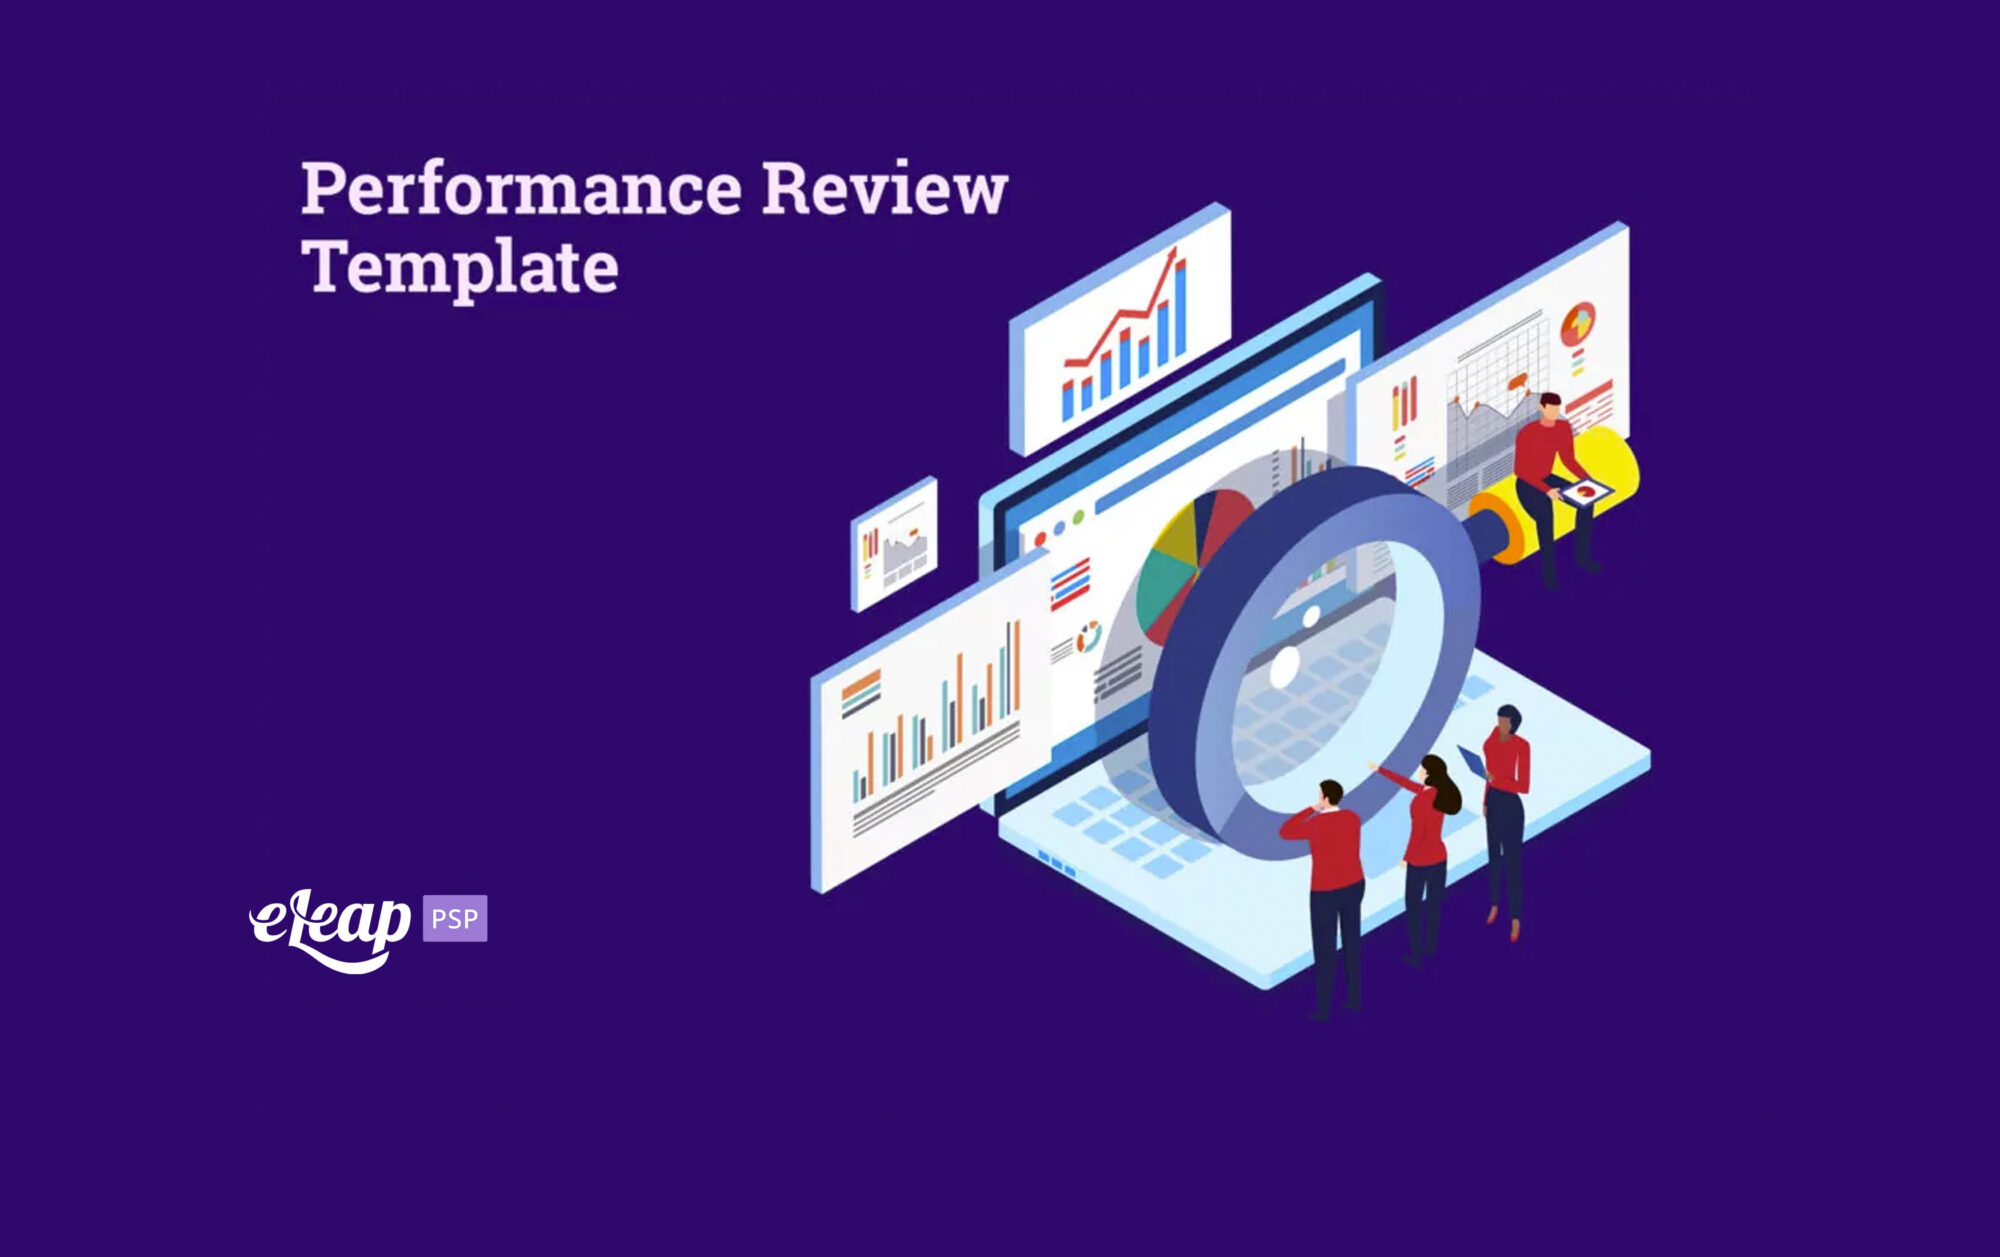 Performance Review Templates